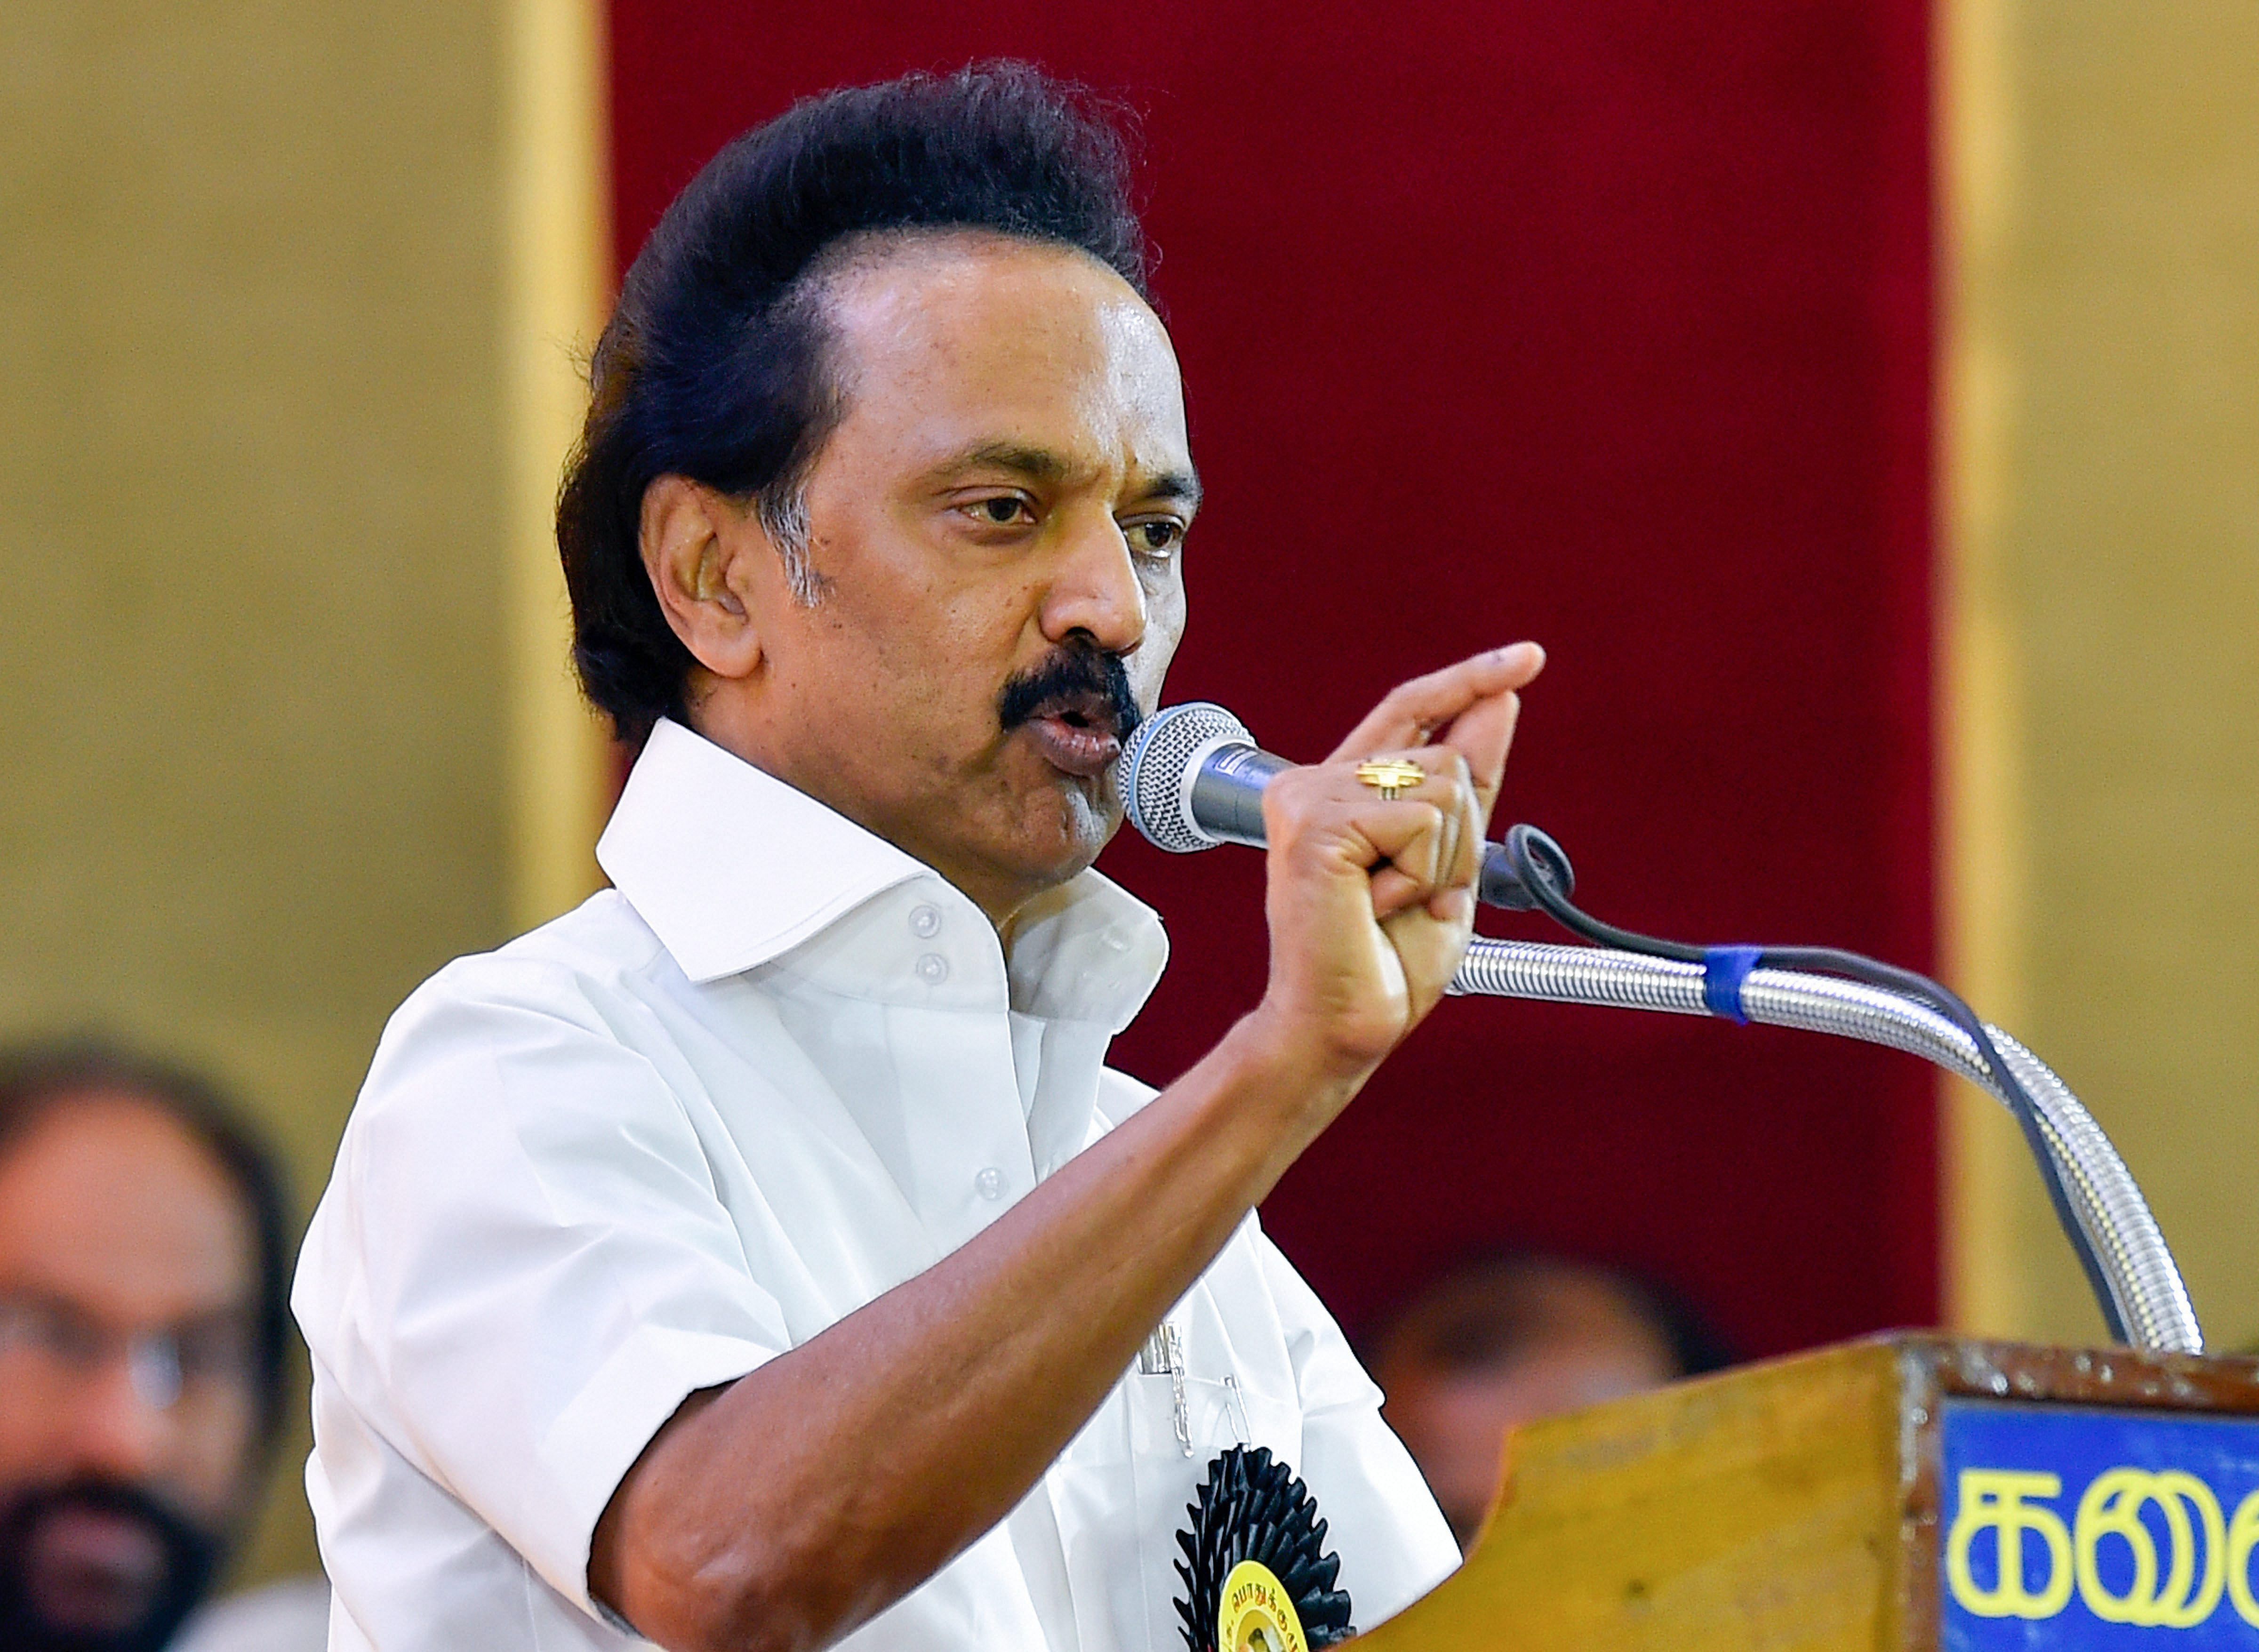 Besides the former Congress President, among those who greeted the DMK chief were Puducherry Chief Minister V Narayanaswamy and VCK chief Thol Thirumavalavan. (Credit: PTI Photo)